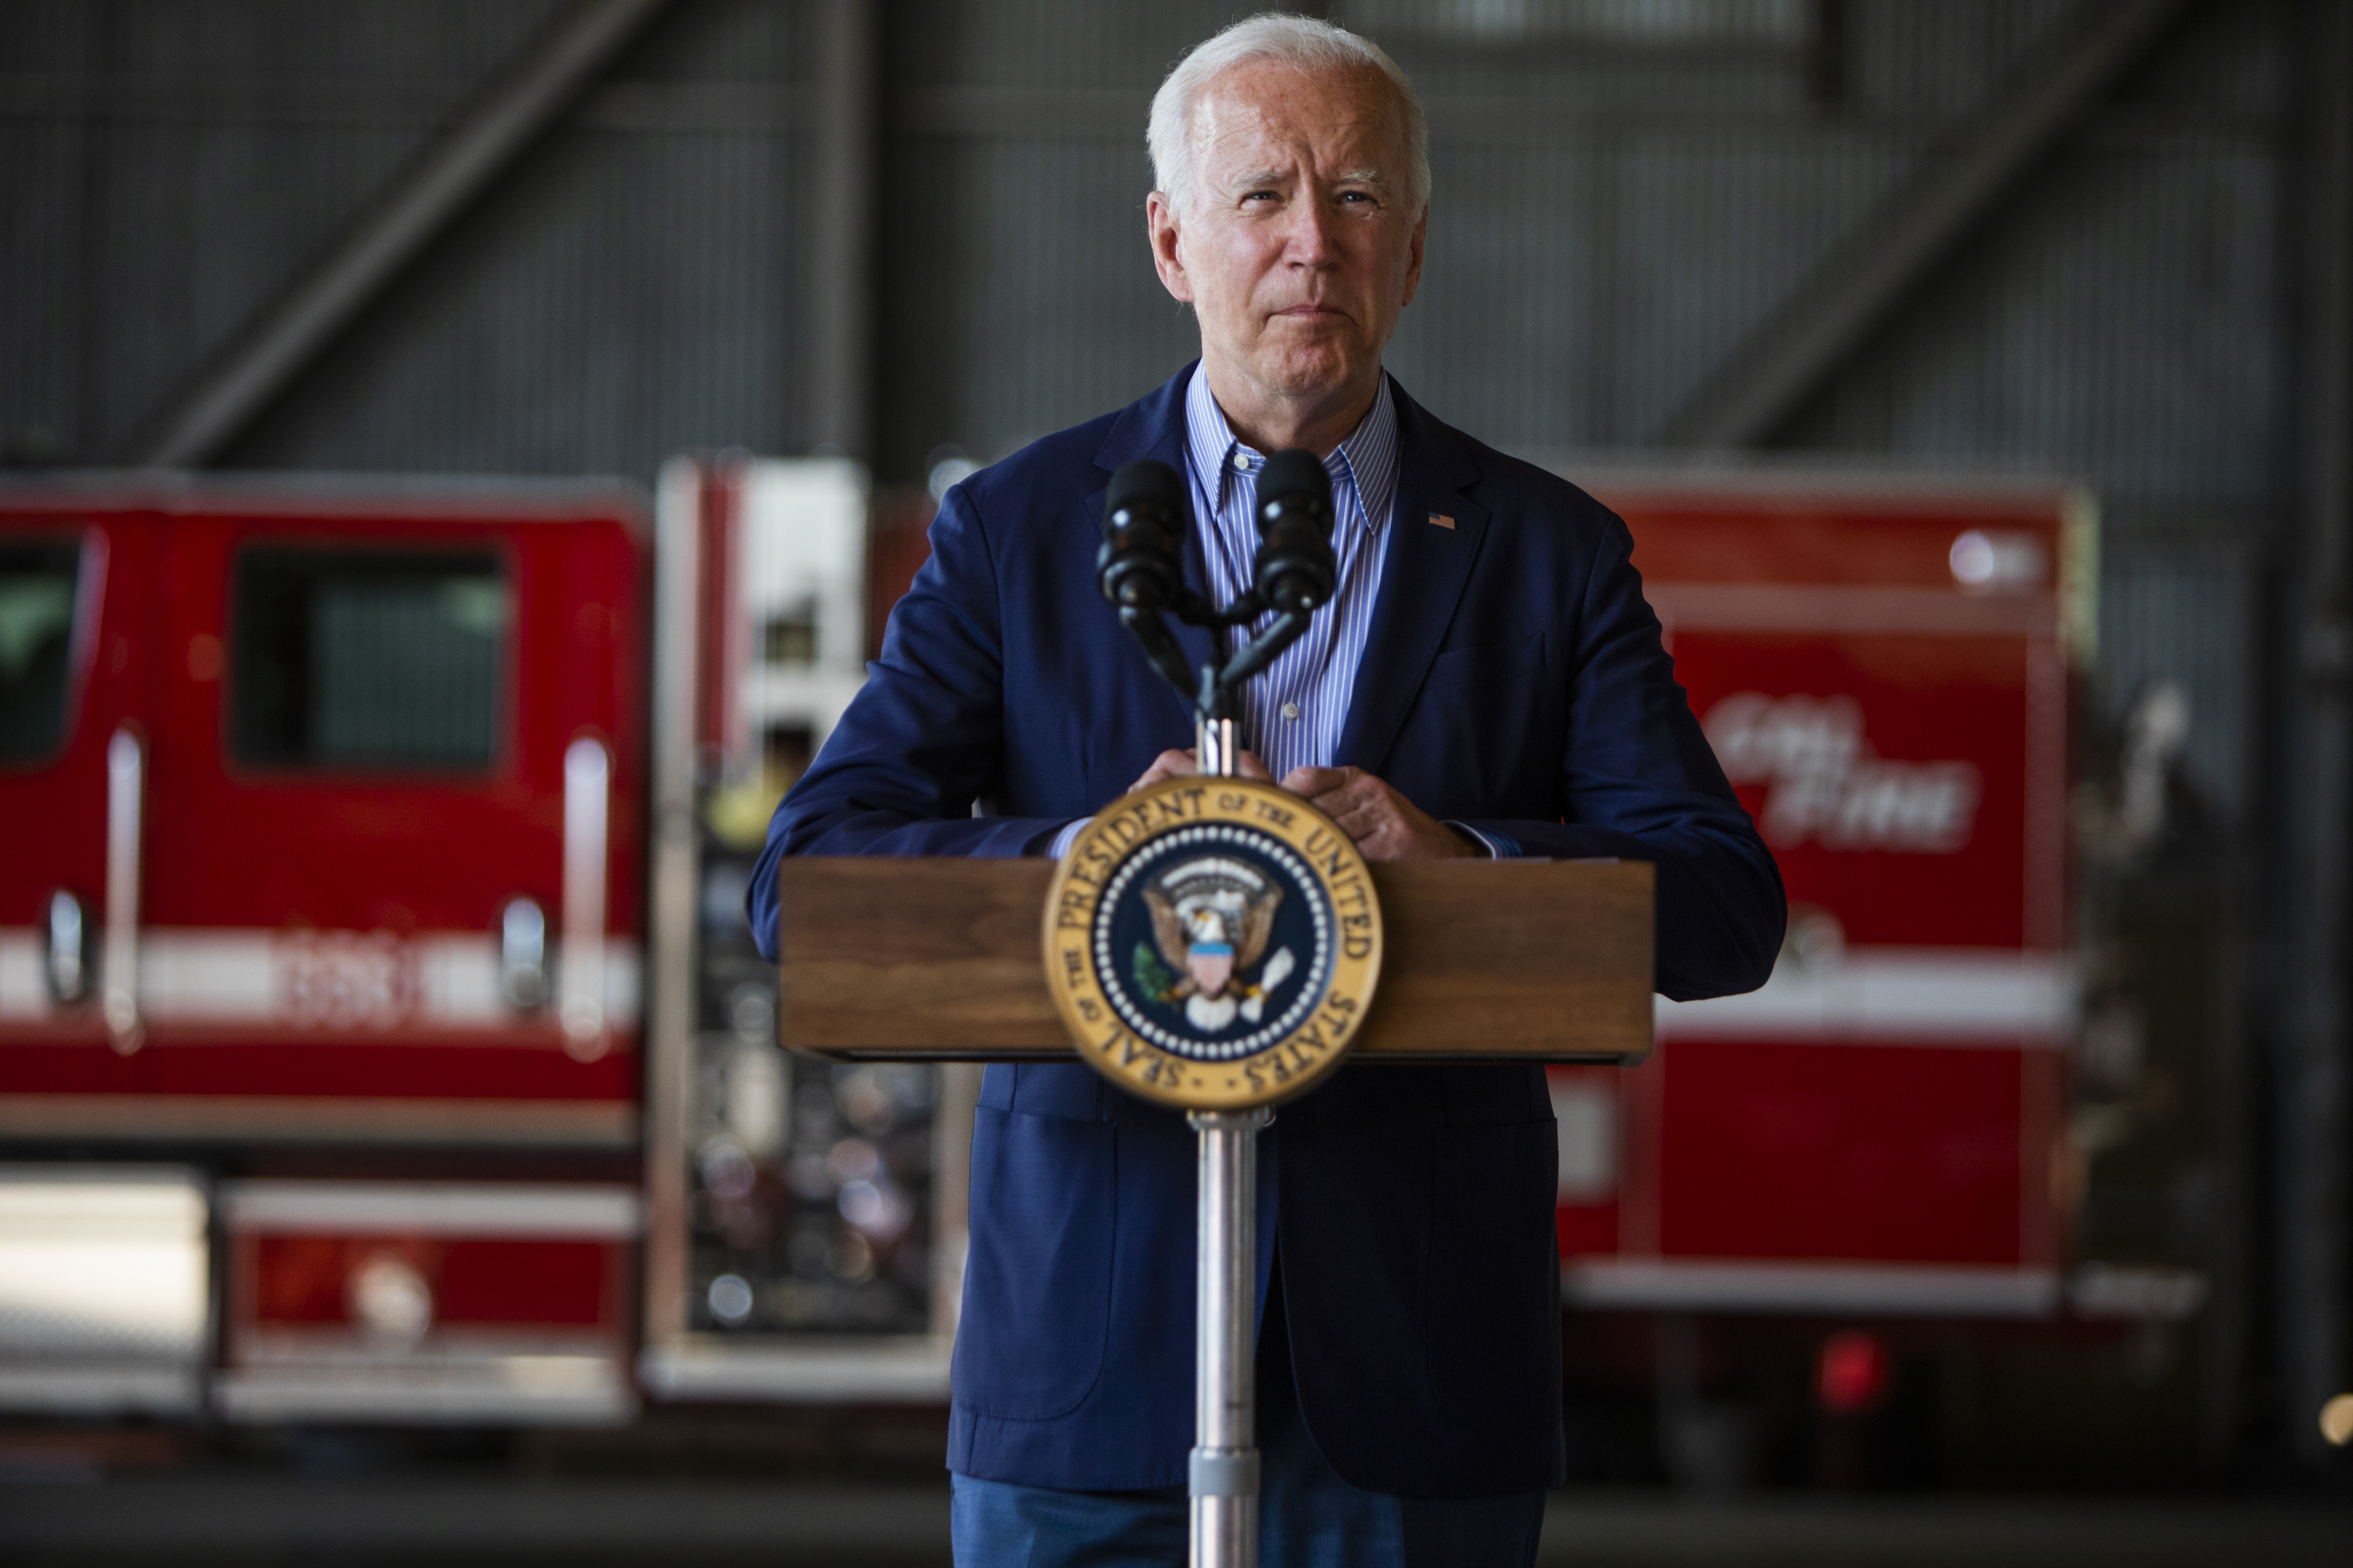 President Biden stands and speaks from a lectern set up near a red emergency vehicle.